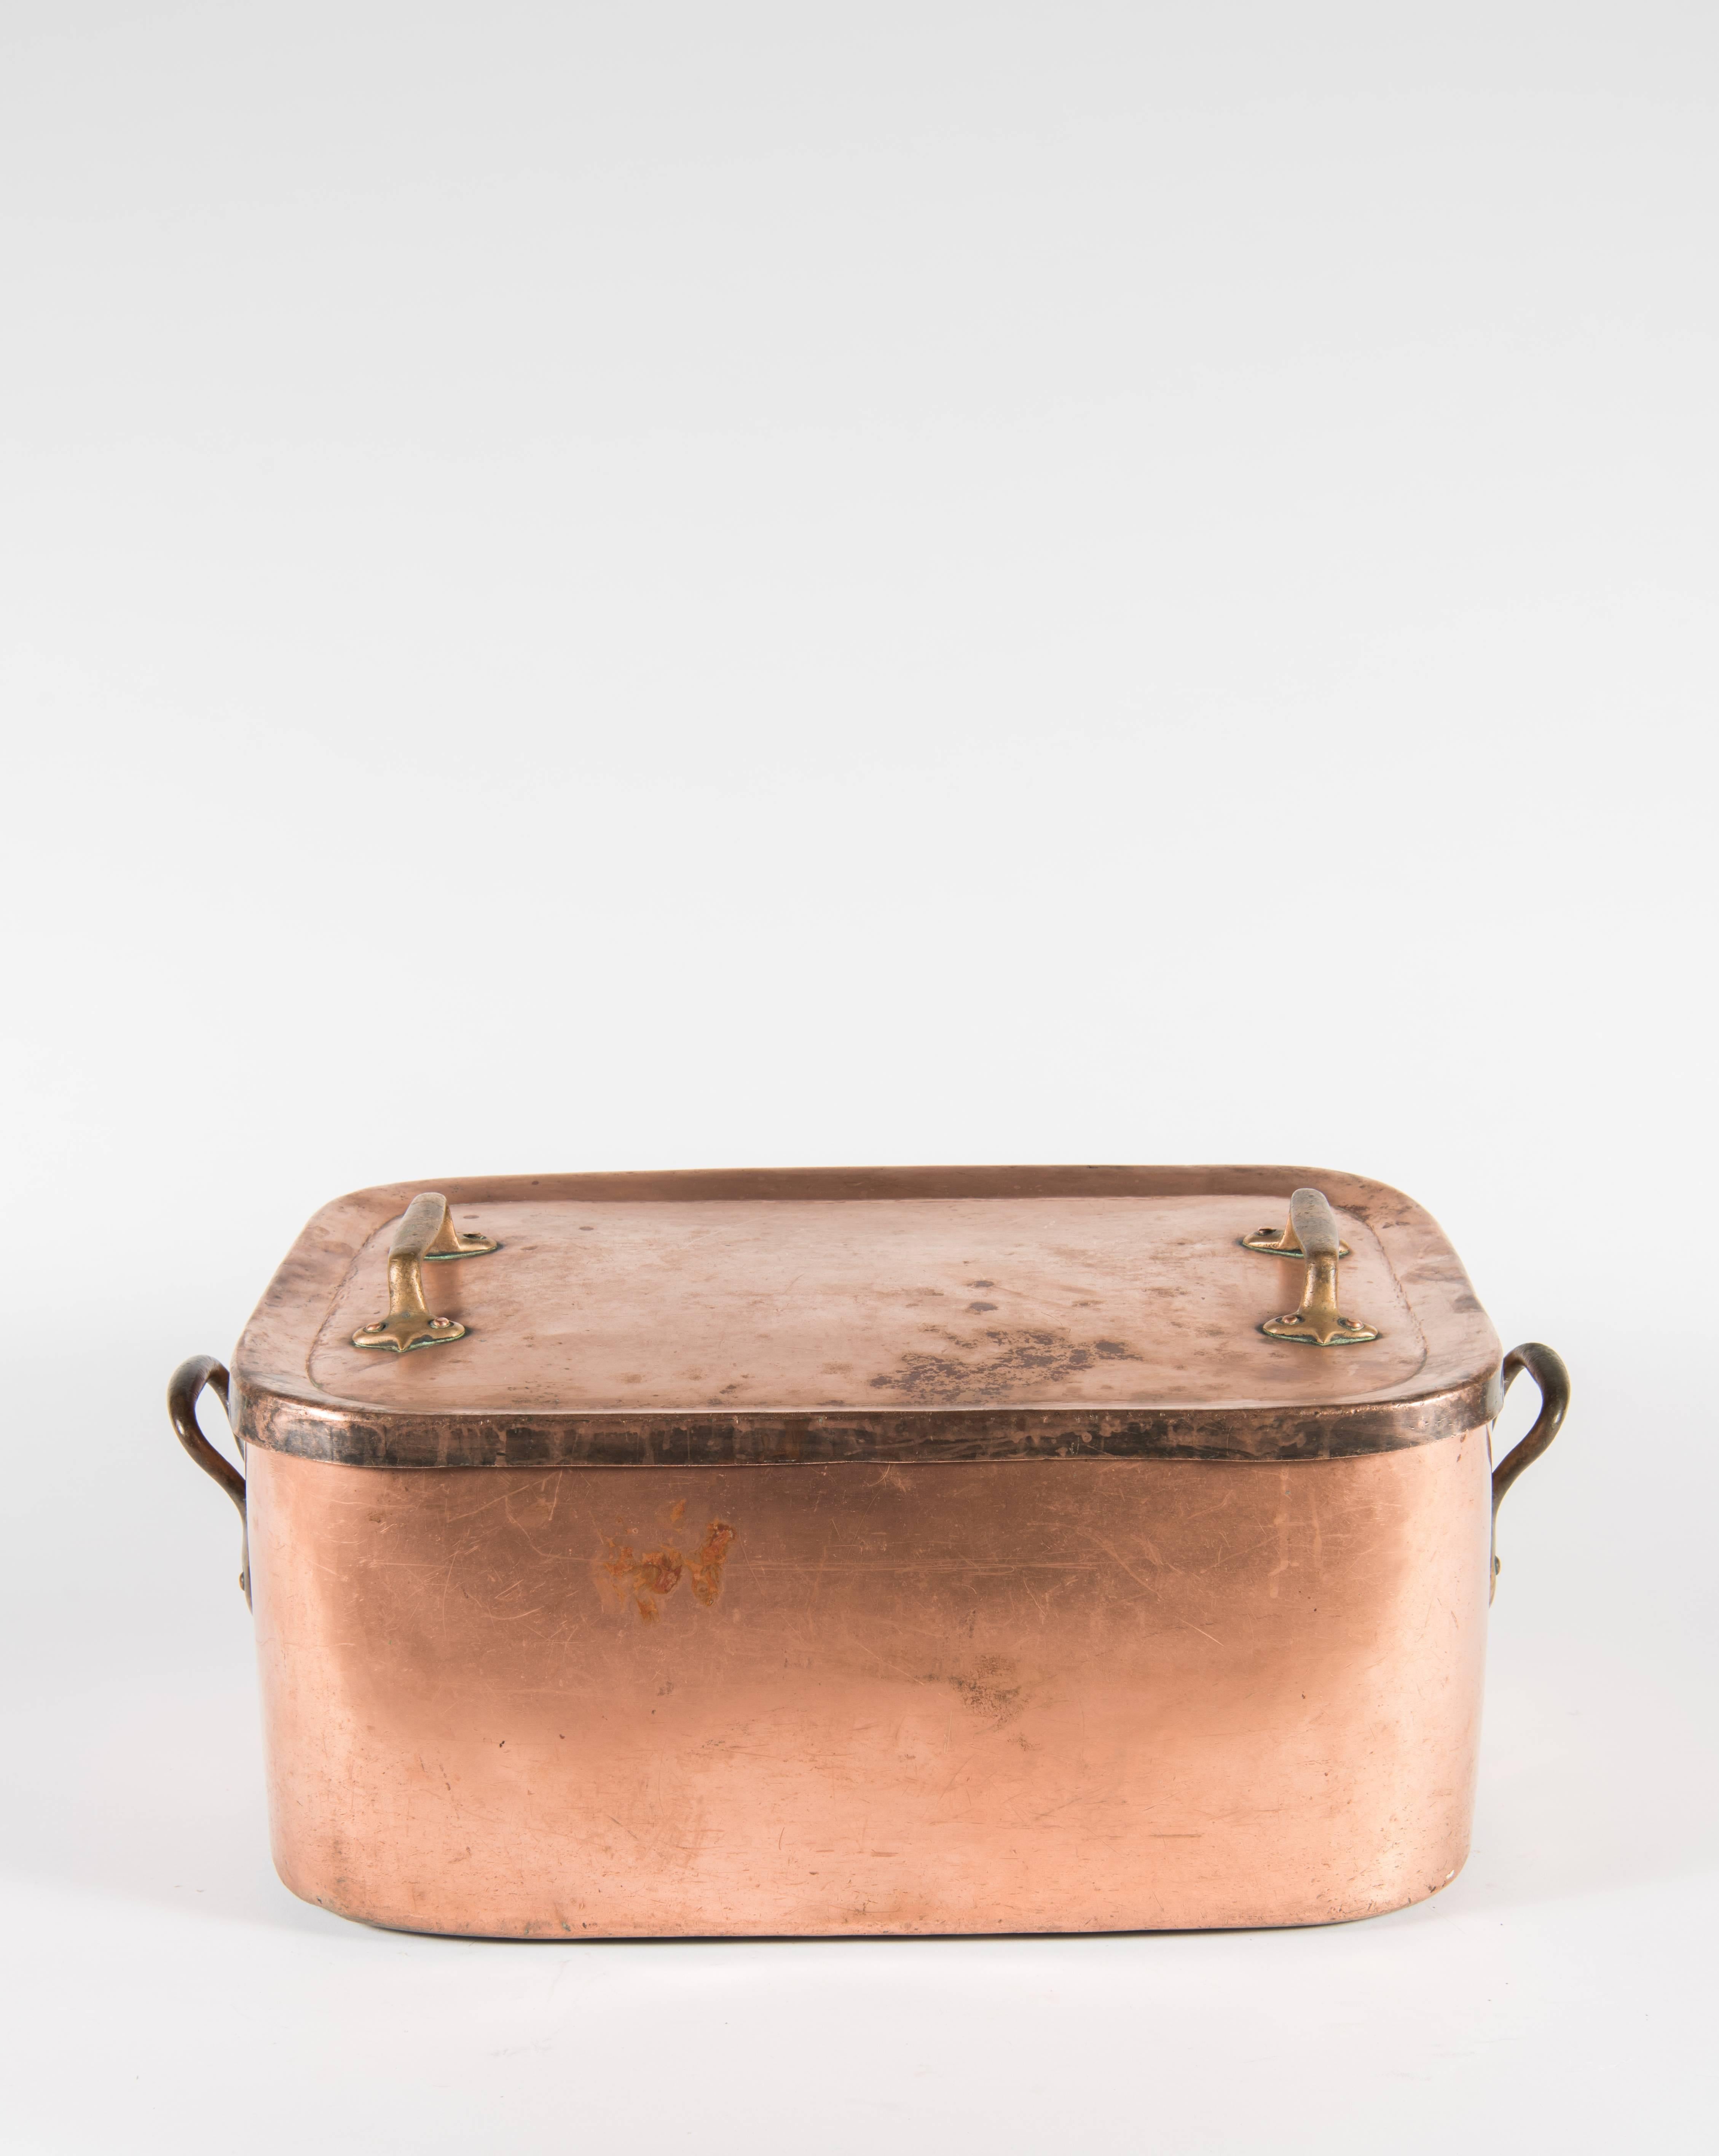 A handsome copper daubiere or braising pot from France. Copper sheets have been shaped and joined with dovetail joints which are still visible. Heavy copper or brass handles are held on with copper rivets. The lid, which is 1 inch deep, does not fit